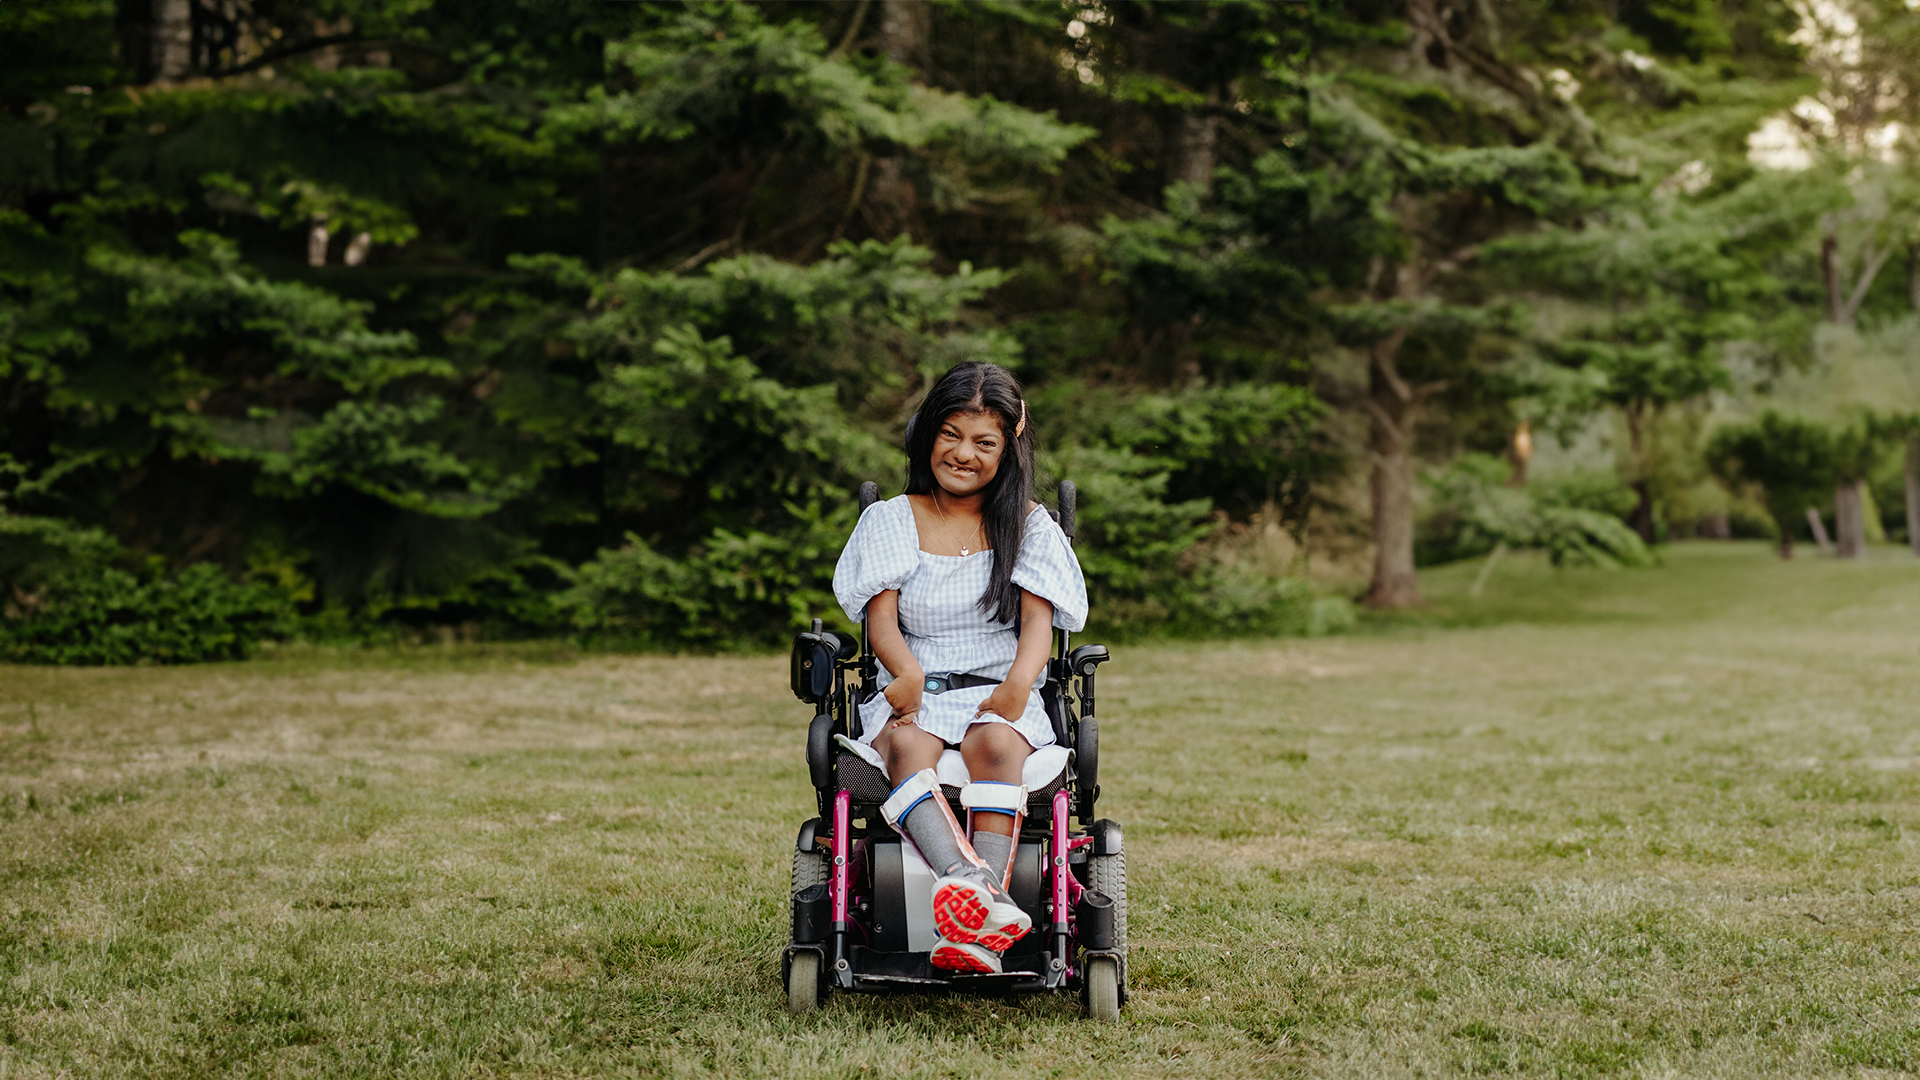 Angelina Premia, a young girl with long black hair and a warm smile sits in a wheelchair in a grassy field. She's wearing a light blue and white checkered dress with short sleeves, and leg braces. The background is softly focused, showing lush greenery and tall trees in a tranquil park setting.